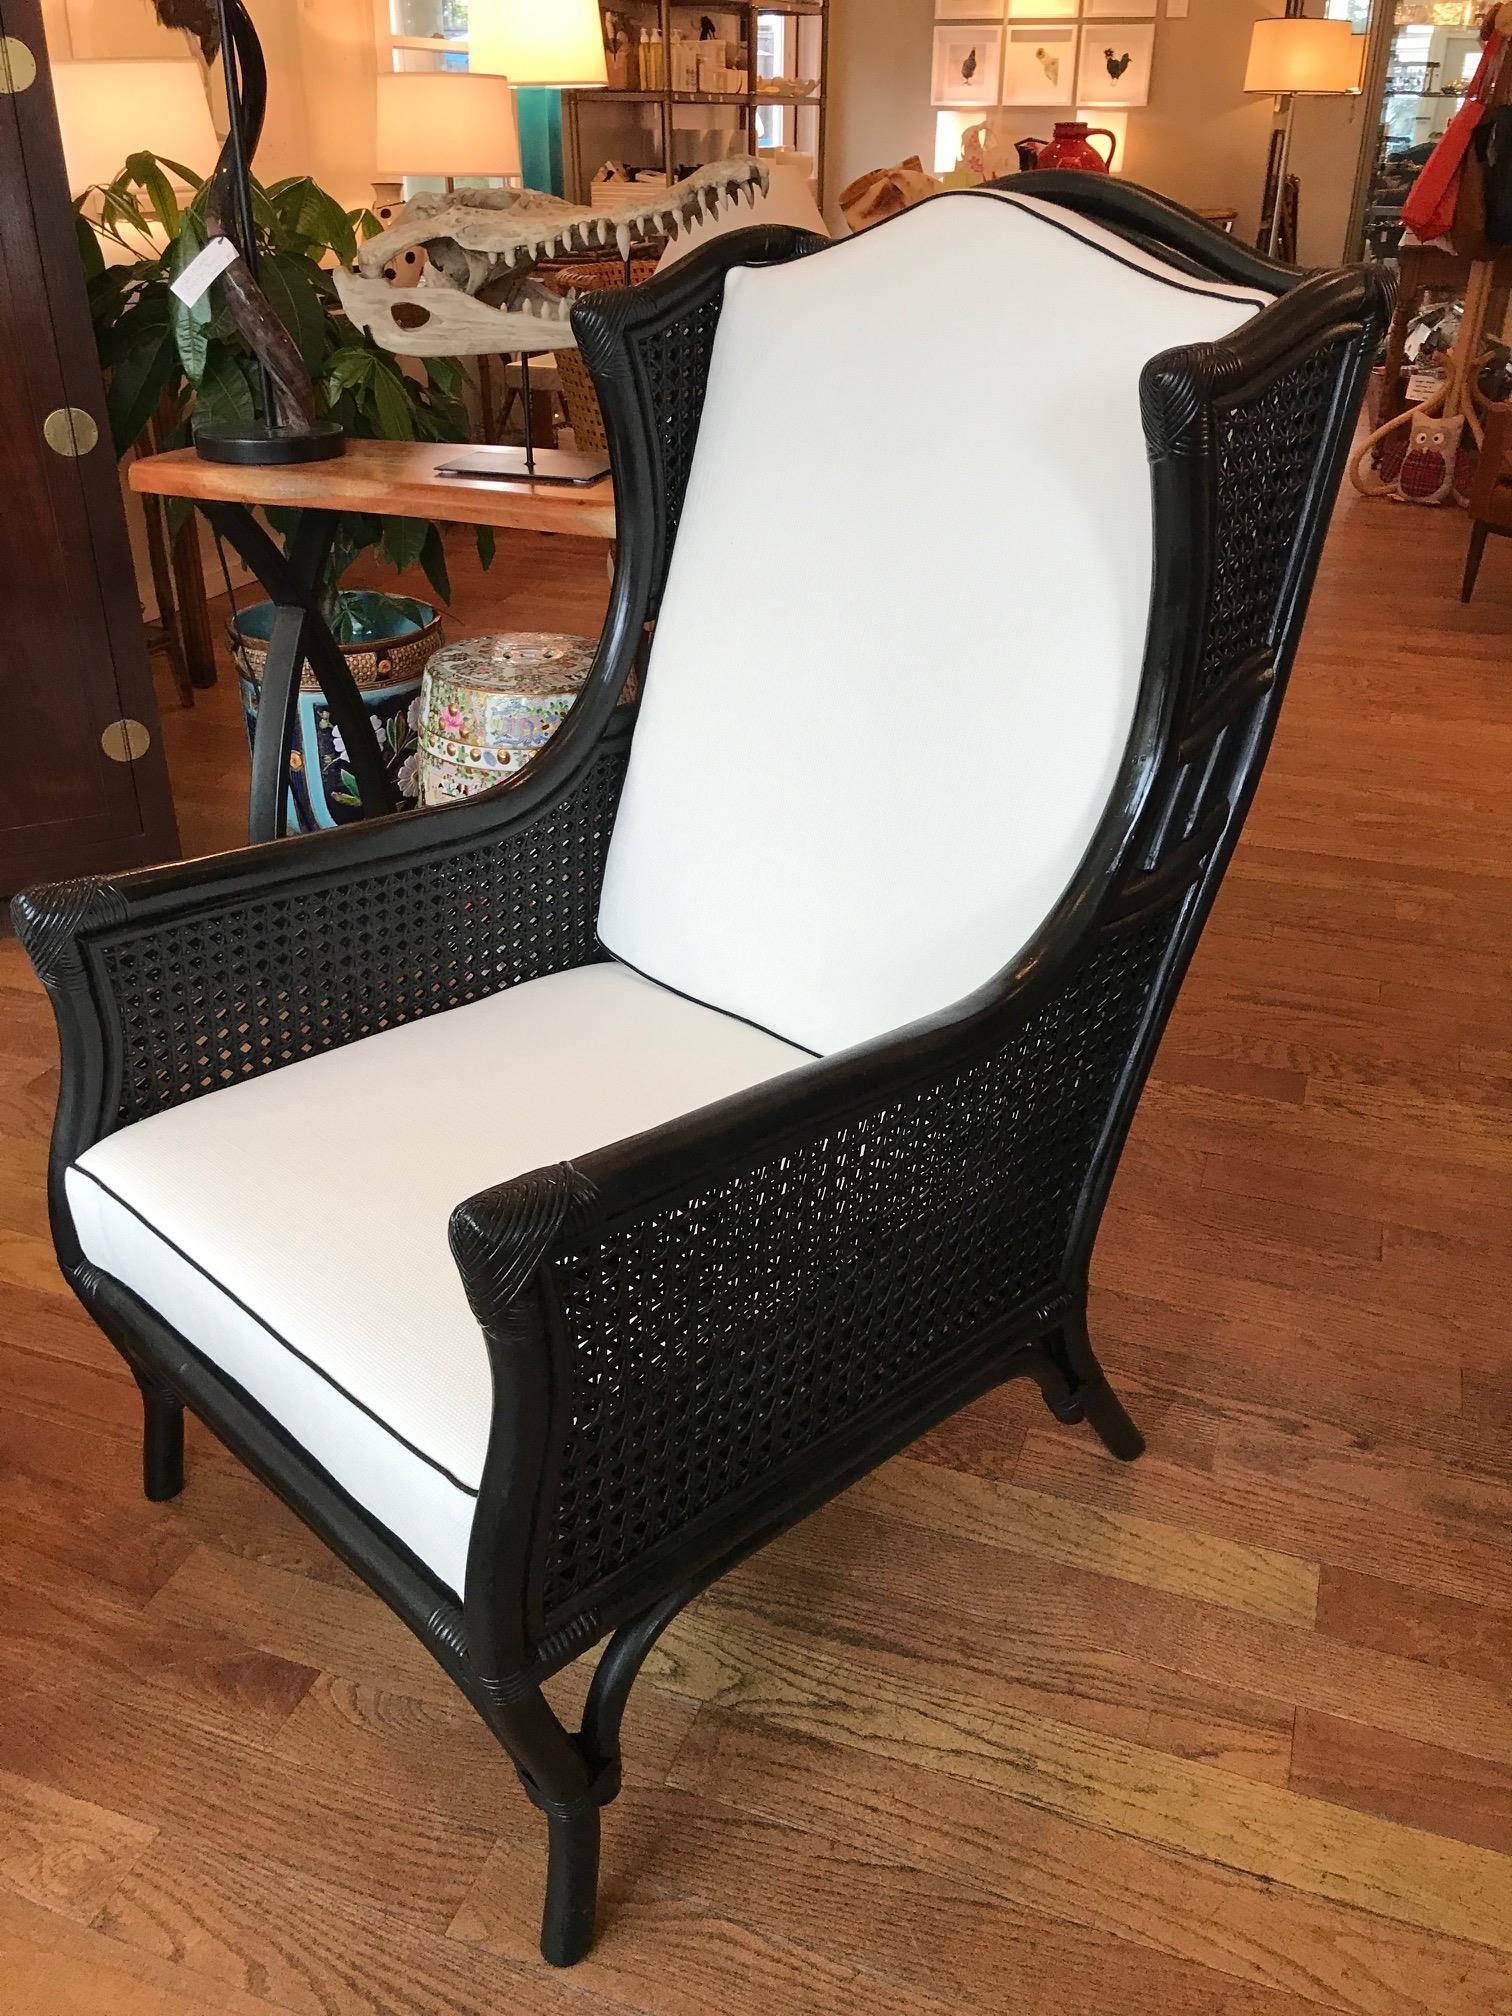 Beautifully restored ficks and reed bamboo and cane armchair with ottoman.
Upholstered in a white weave sunbrella fabric with black single welt, zippered cushions, all new filling.
The ottoman measures 24 inches wide and 18 inches deep, seat